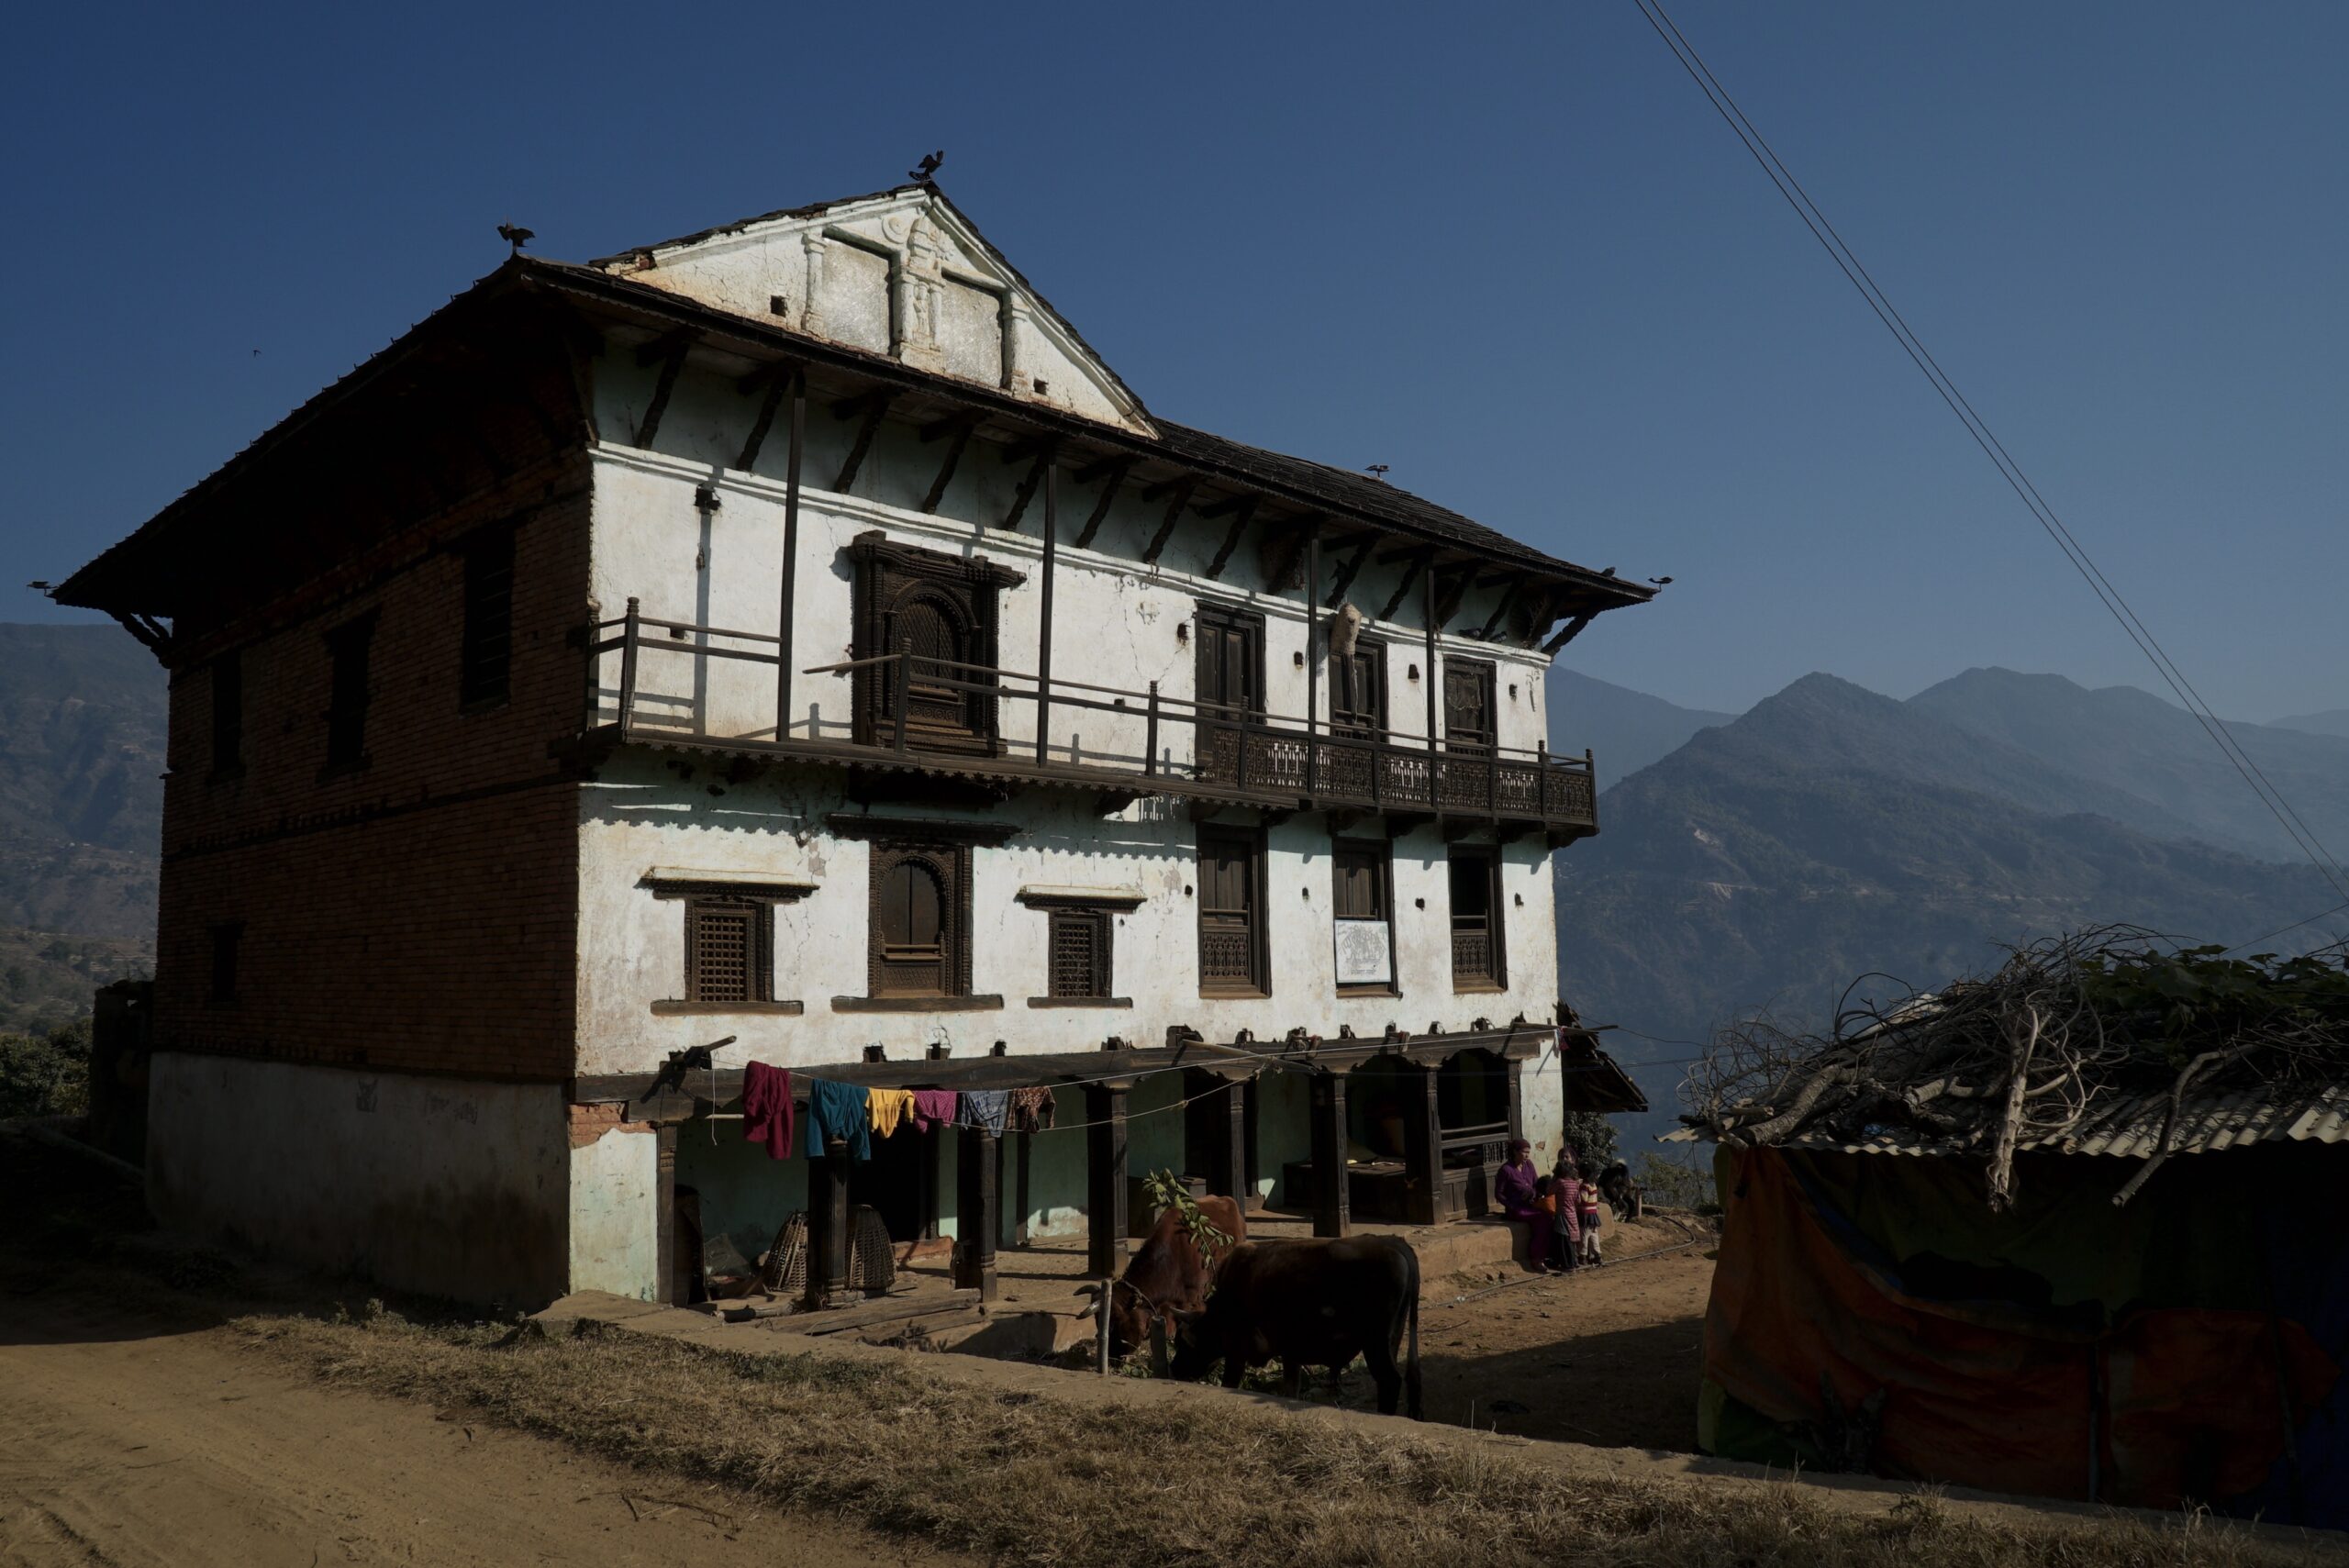 The loss of the old village house - Local Nepal Today